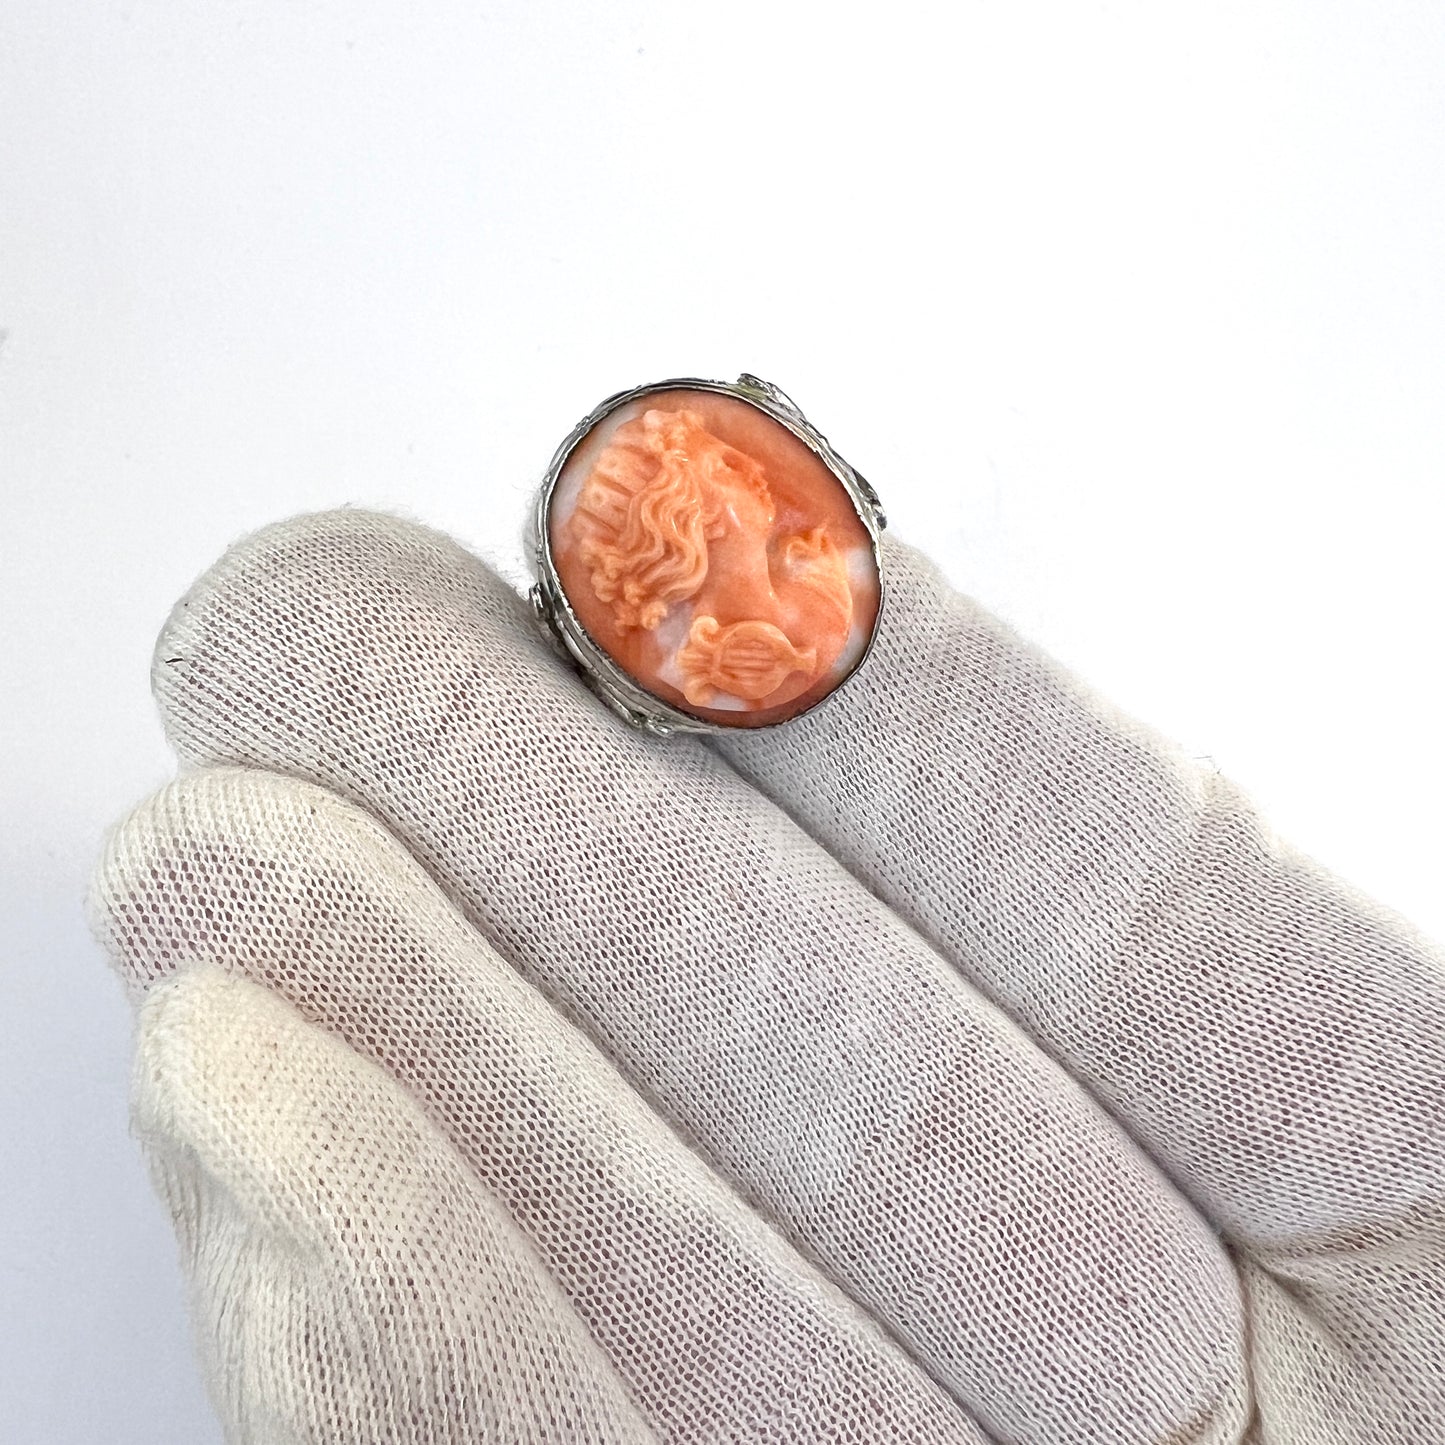 Ostby & Barton, USA c 1940s. Sterling Silver Coral Cameo Ring.